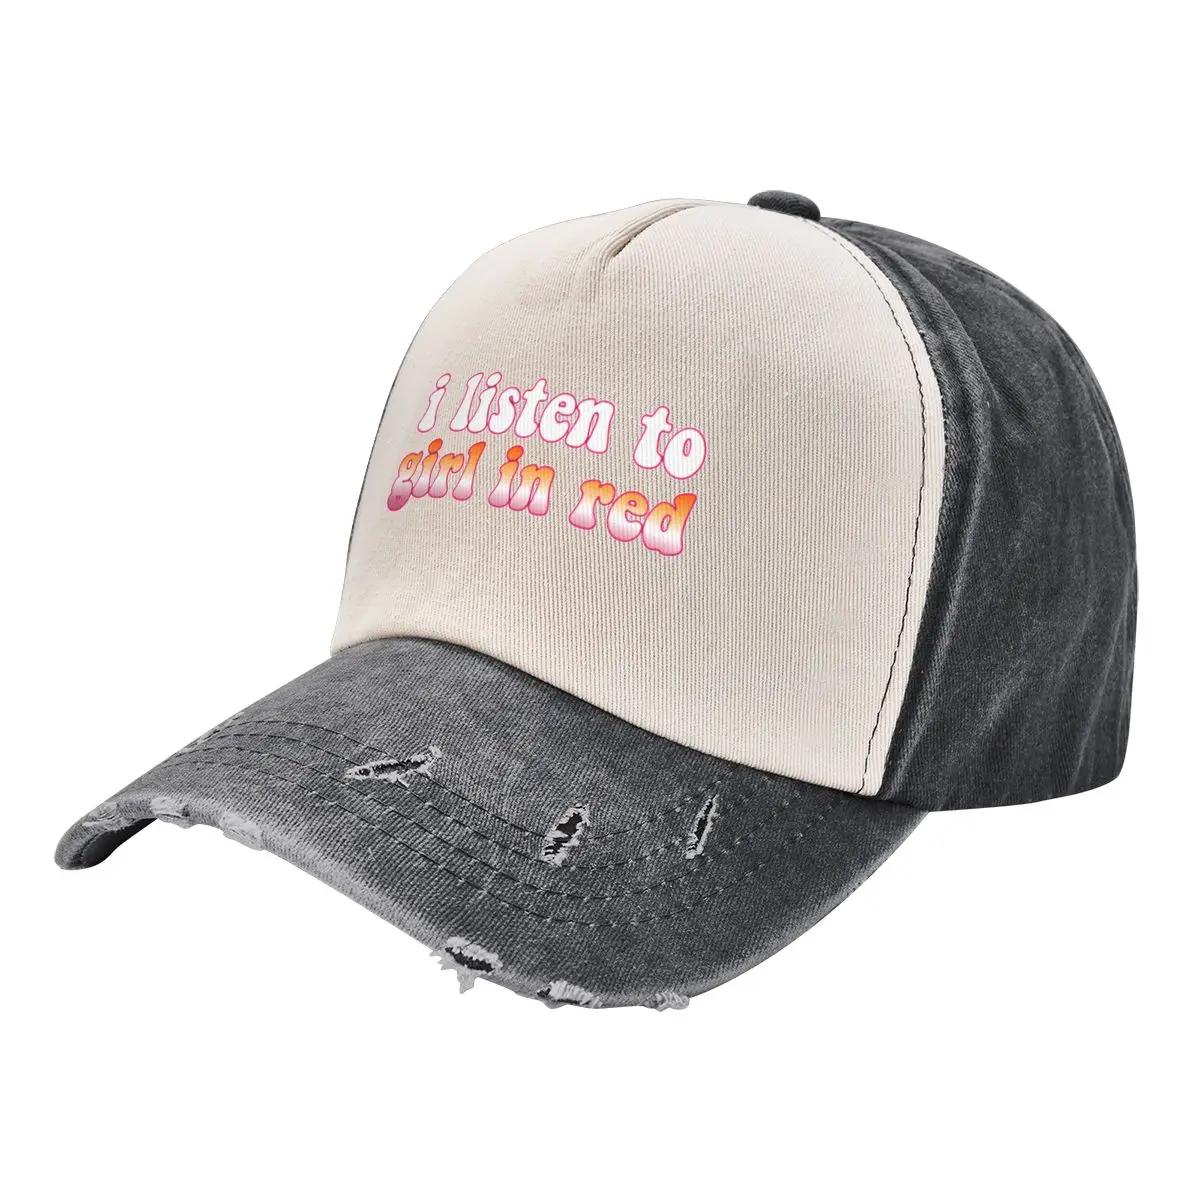 

i listen to girl in red Baseball Cap Beach dad hat Snap Back Hat hiking hat Sun Hats For Women Men's